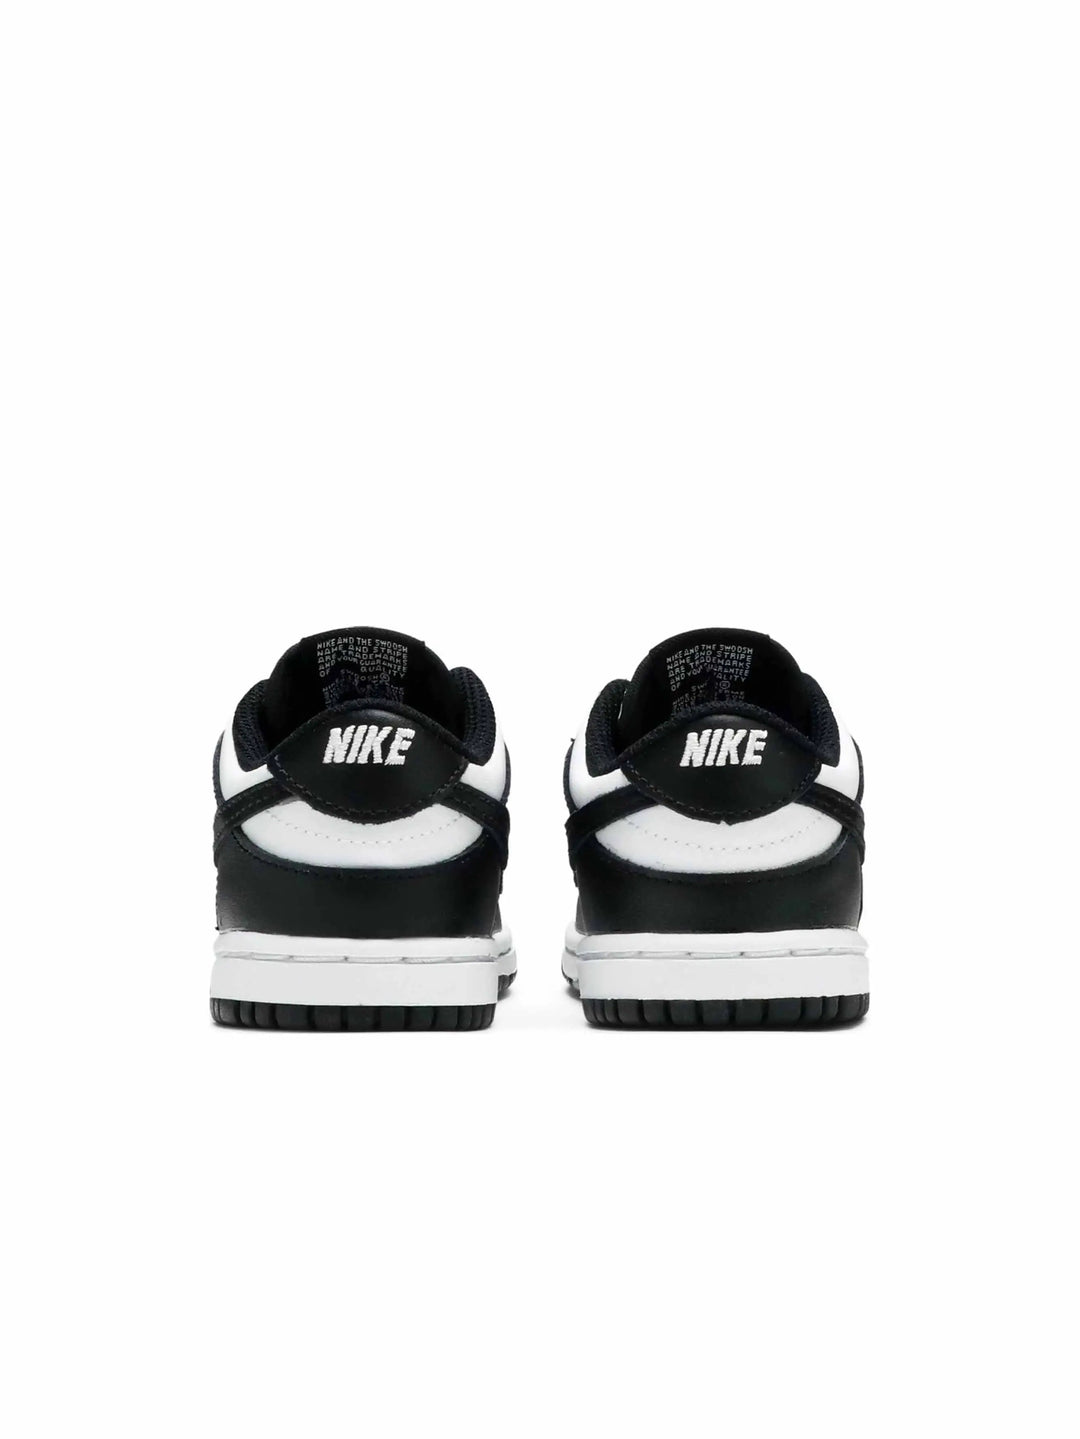 Nike Dunk Low Retro White Black Panda (TD) in Auckland, New Zealand - Shop name